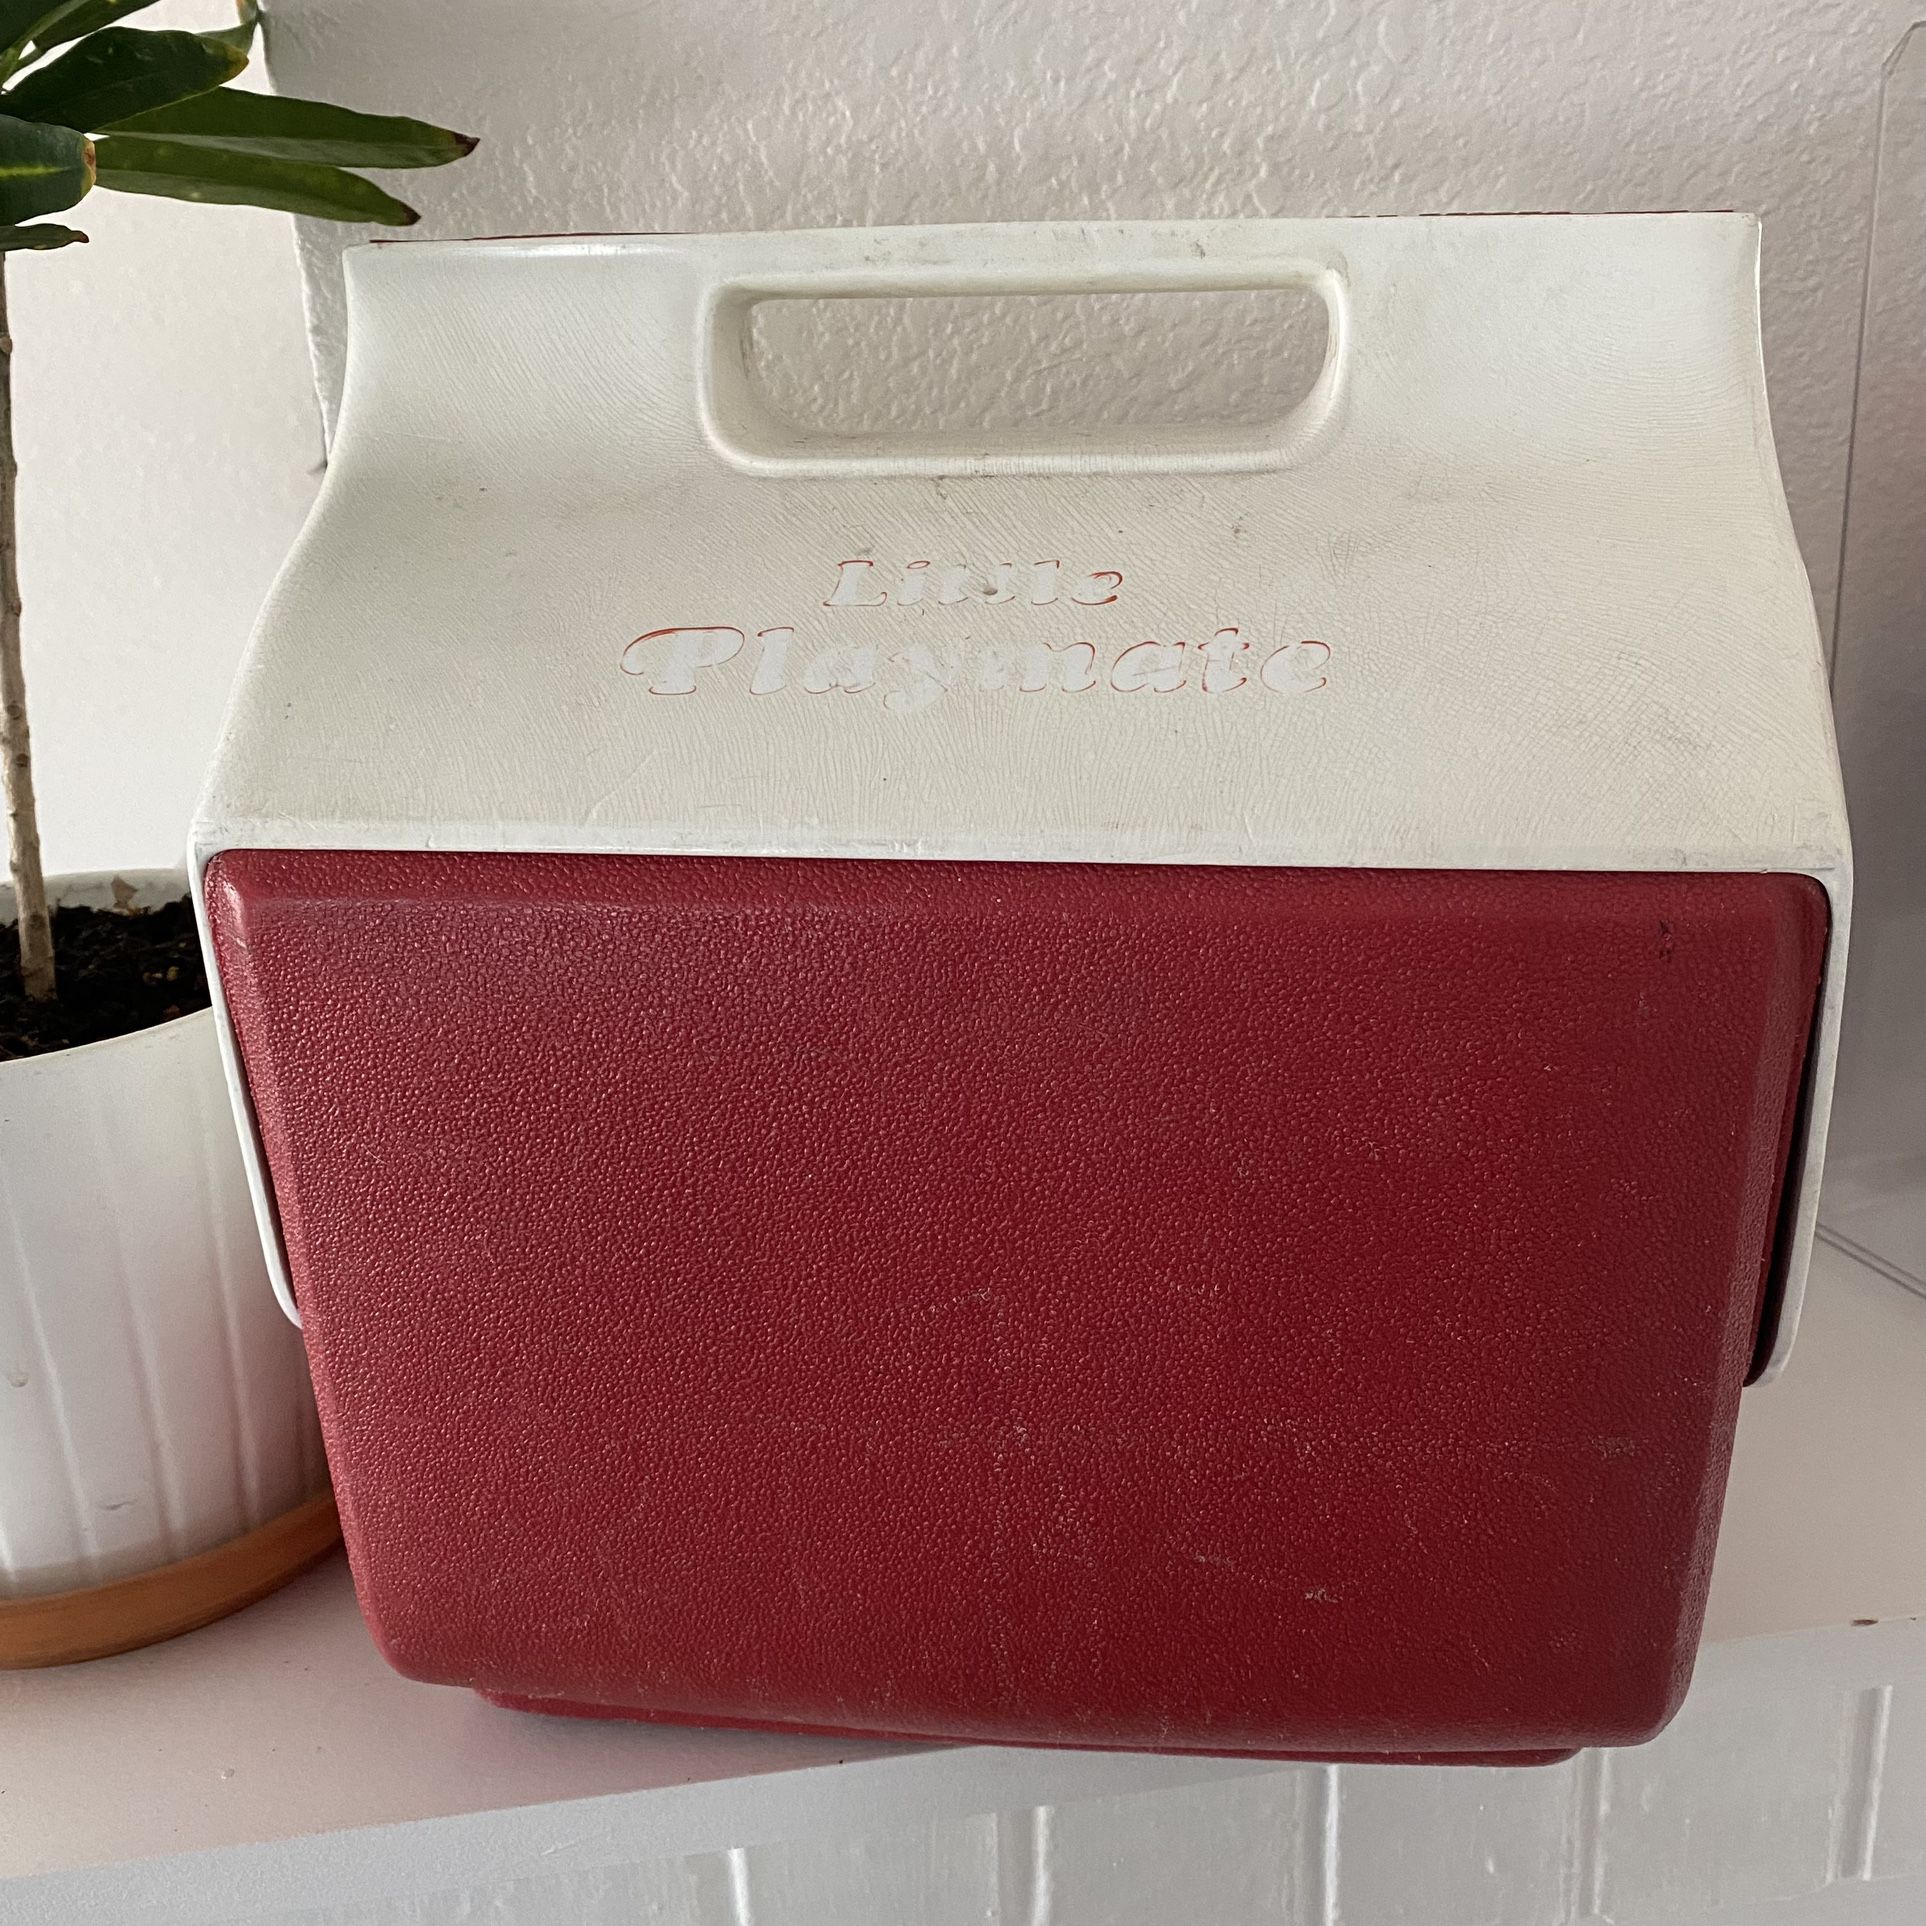 Vintage Igloo Little Playmate Cooler ice chest red & white 